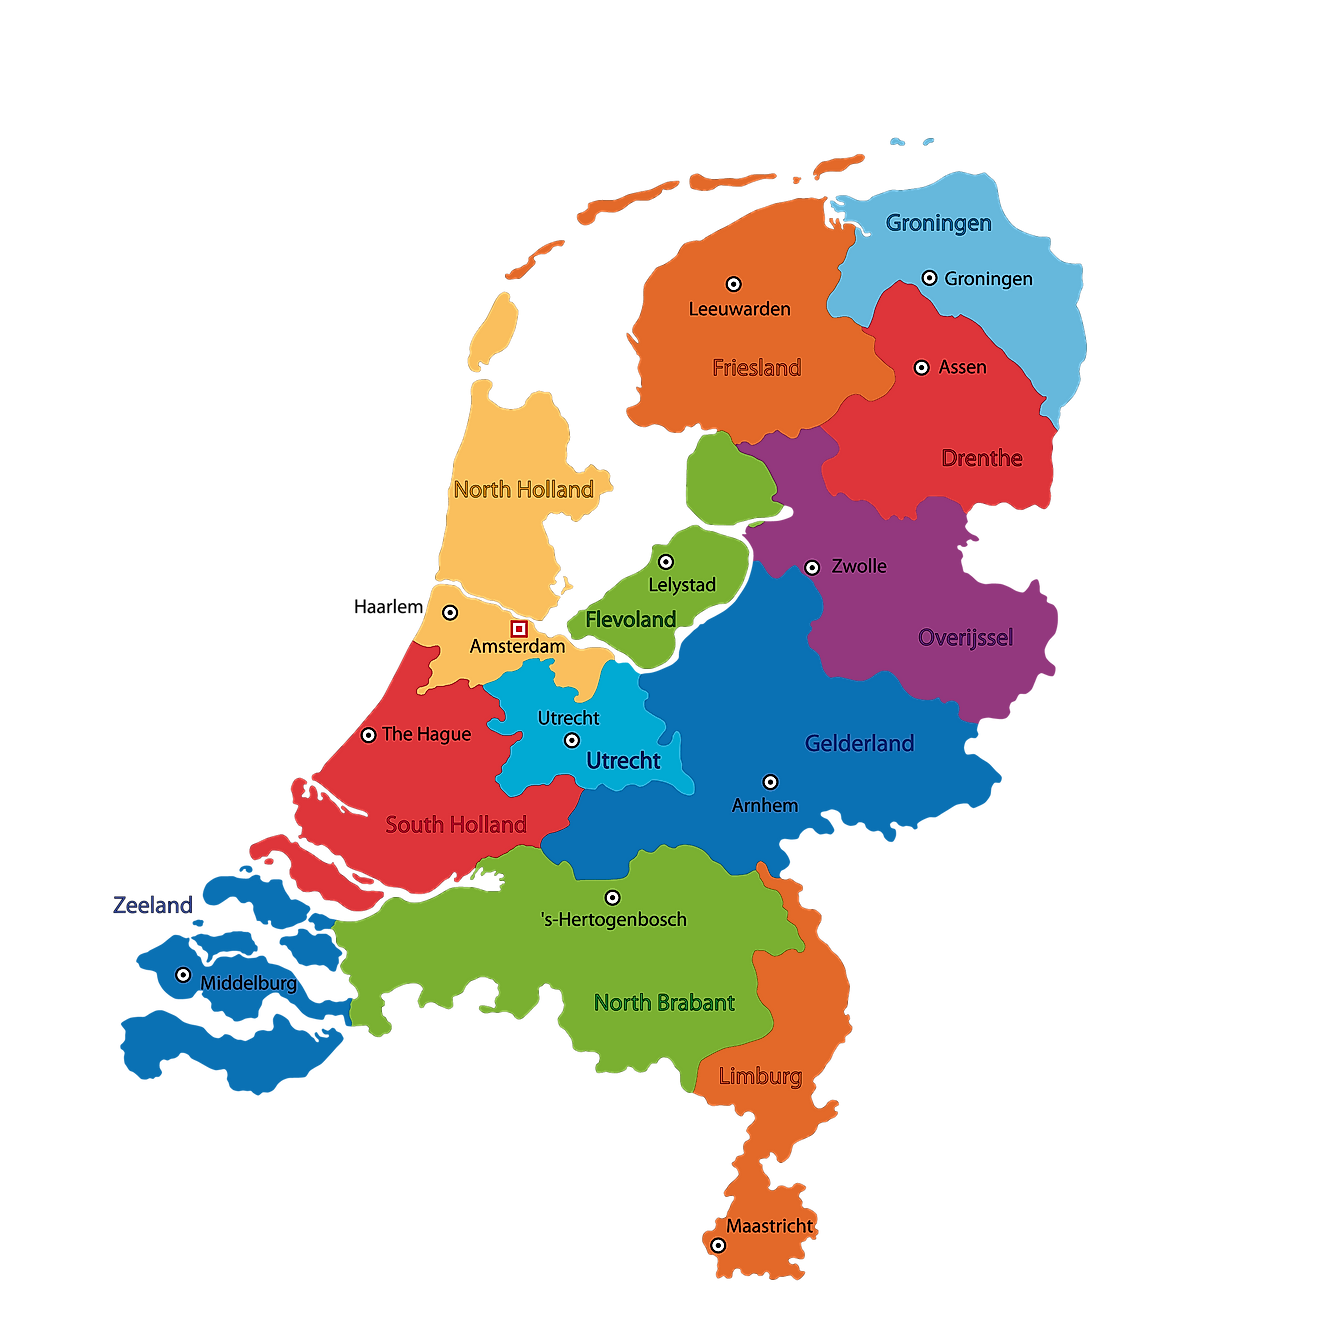 Political Map of The Netherlands showing its 12 provinces and the capital city of Amsterdam